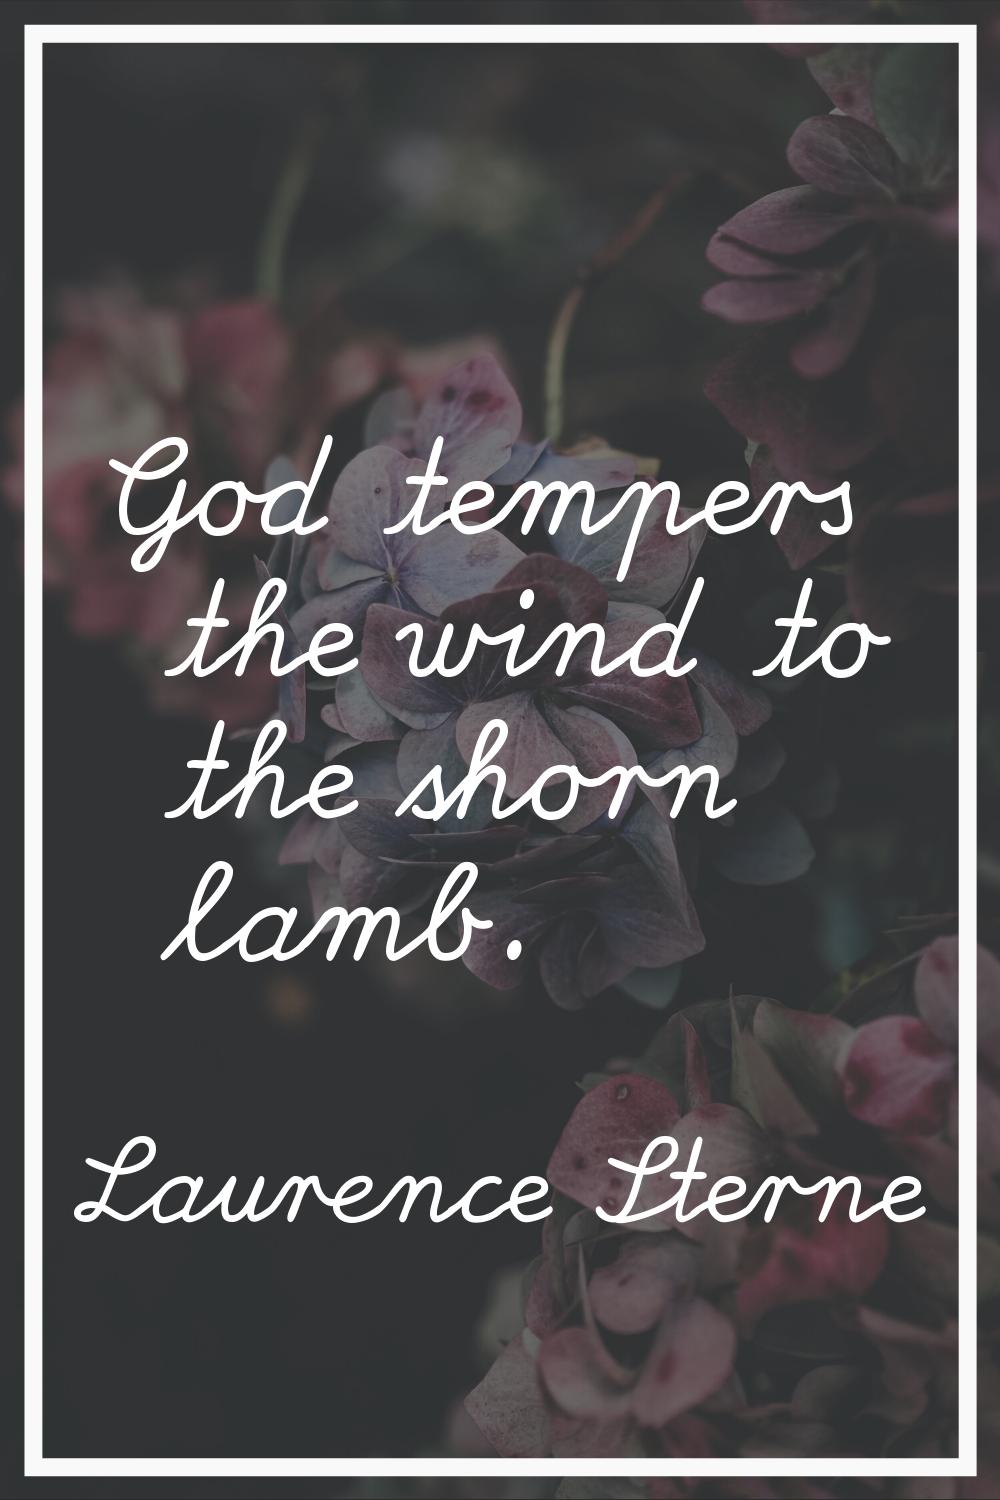 God tempers the wind to the shorn lamb.